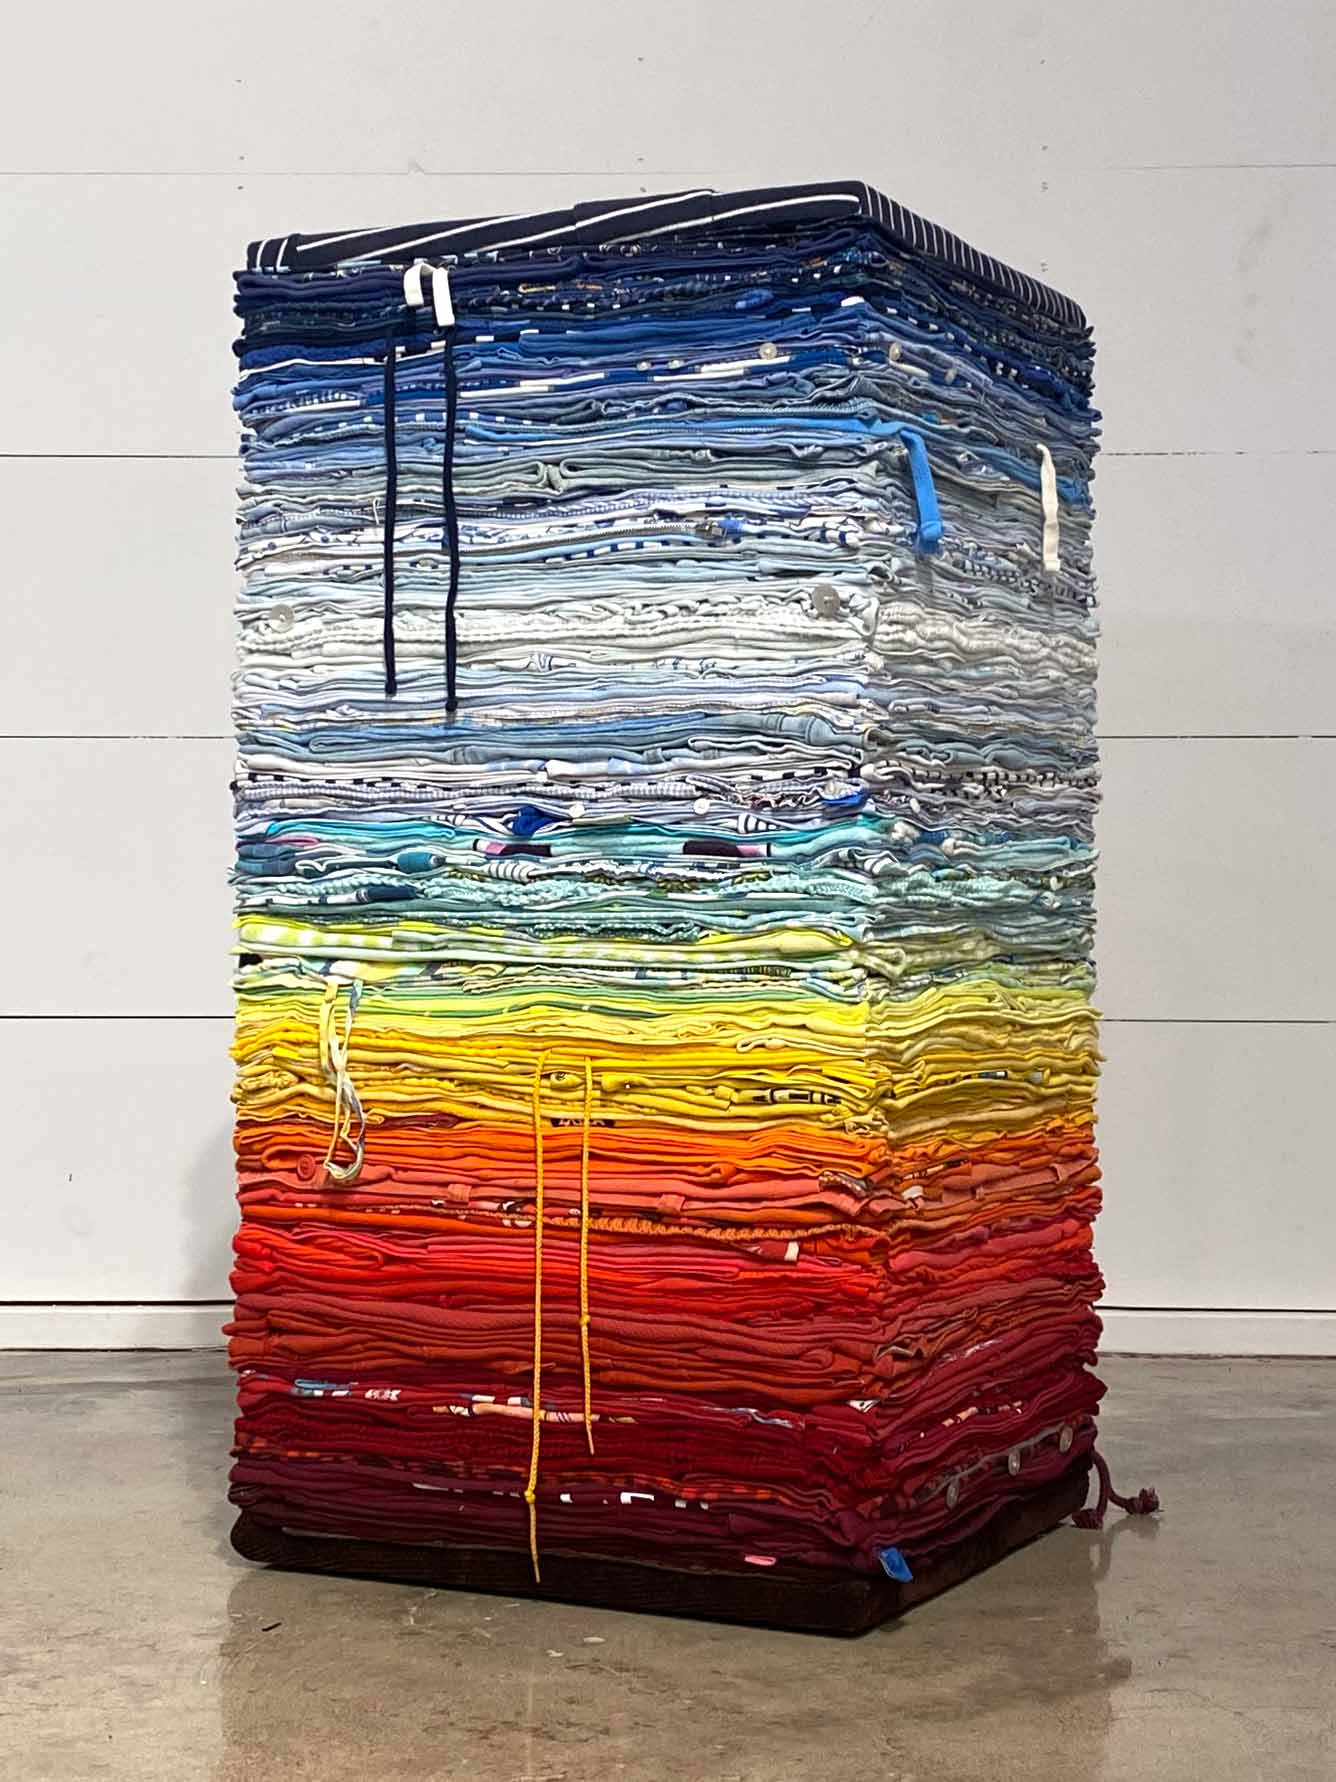 Table made out of layers of used clothing, arranged in a gradient from maroon red, orange, yellow, sky blue, to navy blue. Clothing transformation into a functional soft abstract sculpture with sustainability in mind as core value to push against mindless consumer culture and waste. The table is a column shape. Made by Derick Melander.